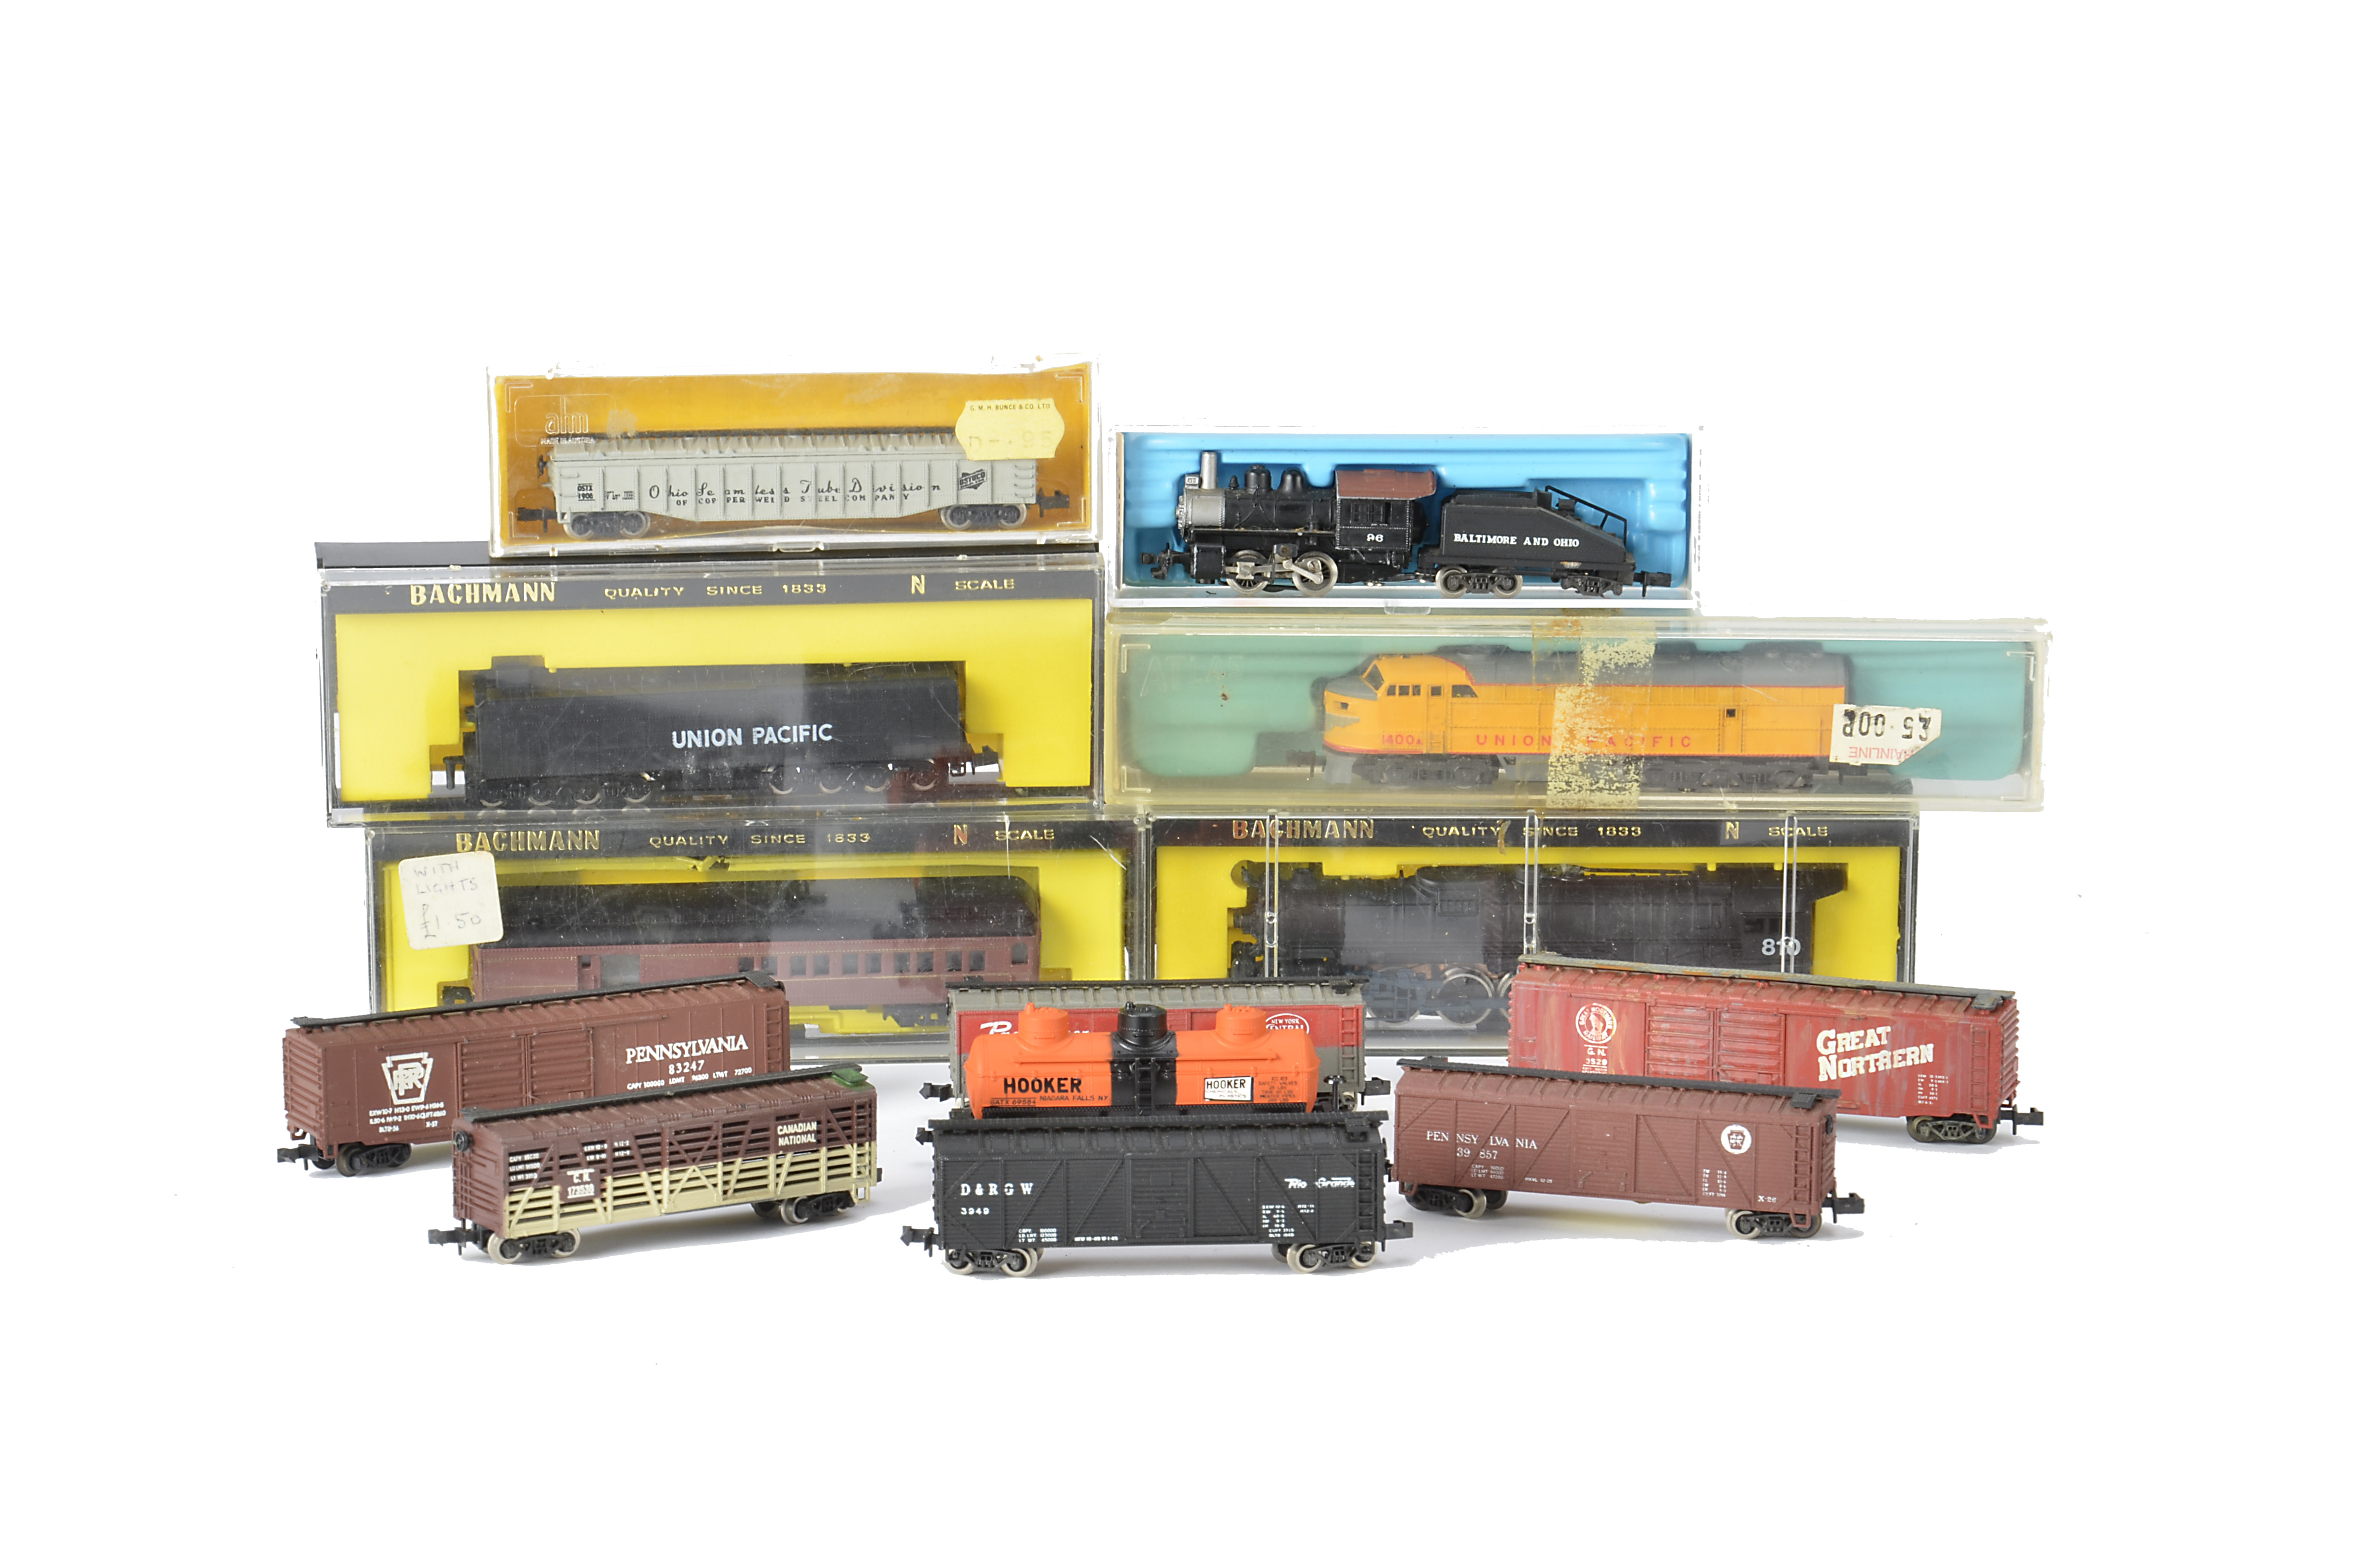 American N Gauge Locomotives and Stock, including Bachmann Union Pacific 4-8-4 no 810 and tender